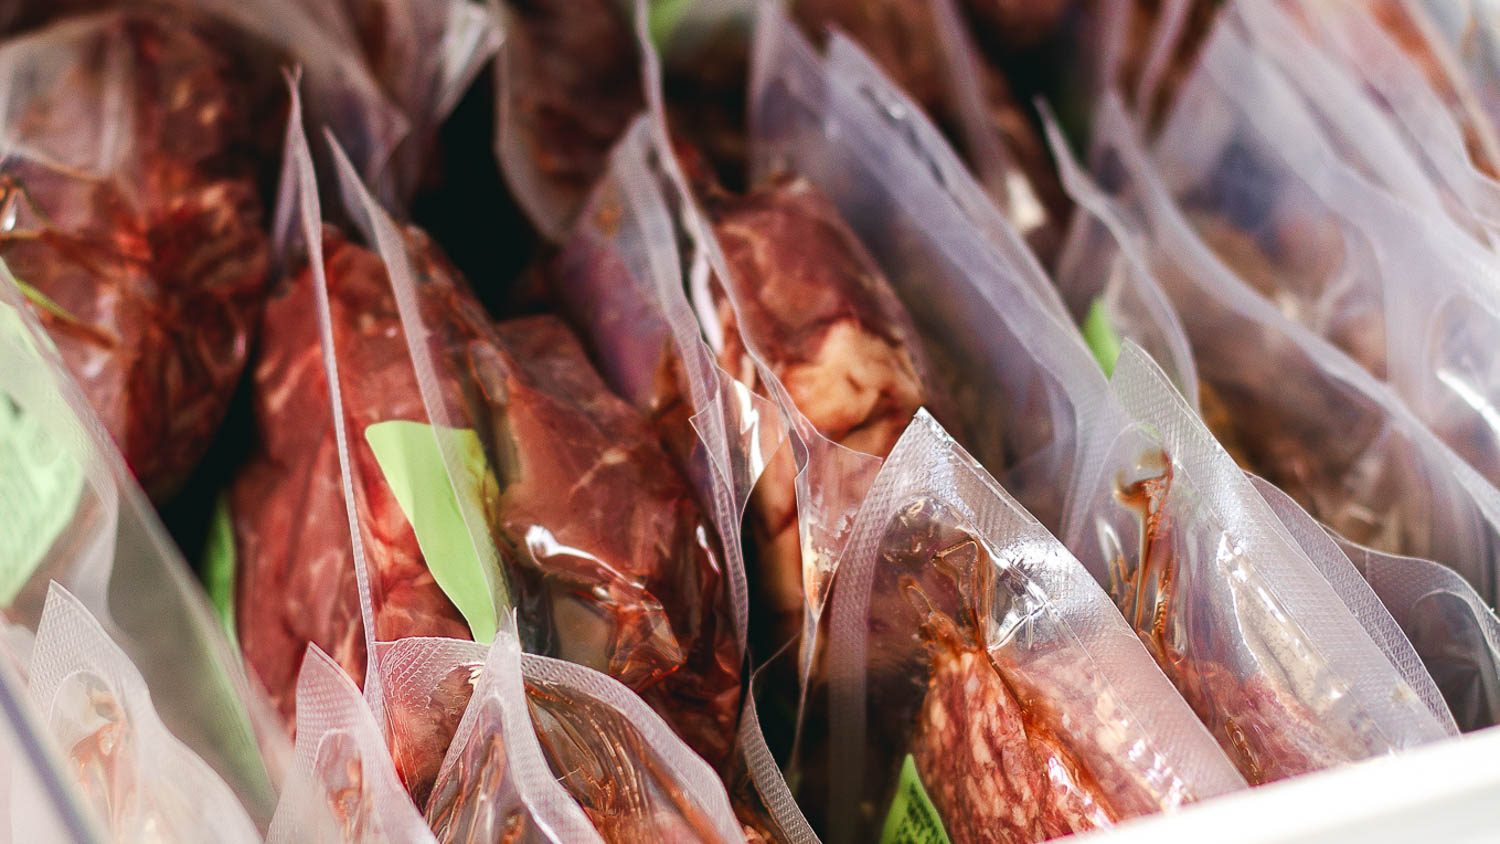 Meat industry ready to shun pre-made bags for vacuum wrapping - Industry  Europe